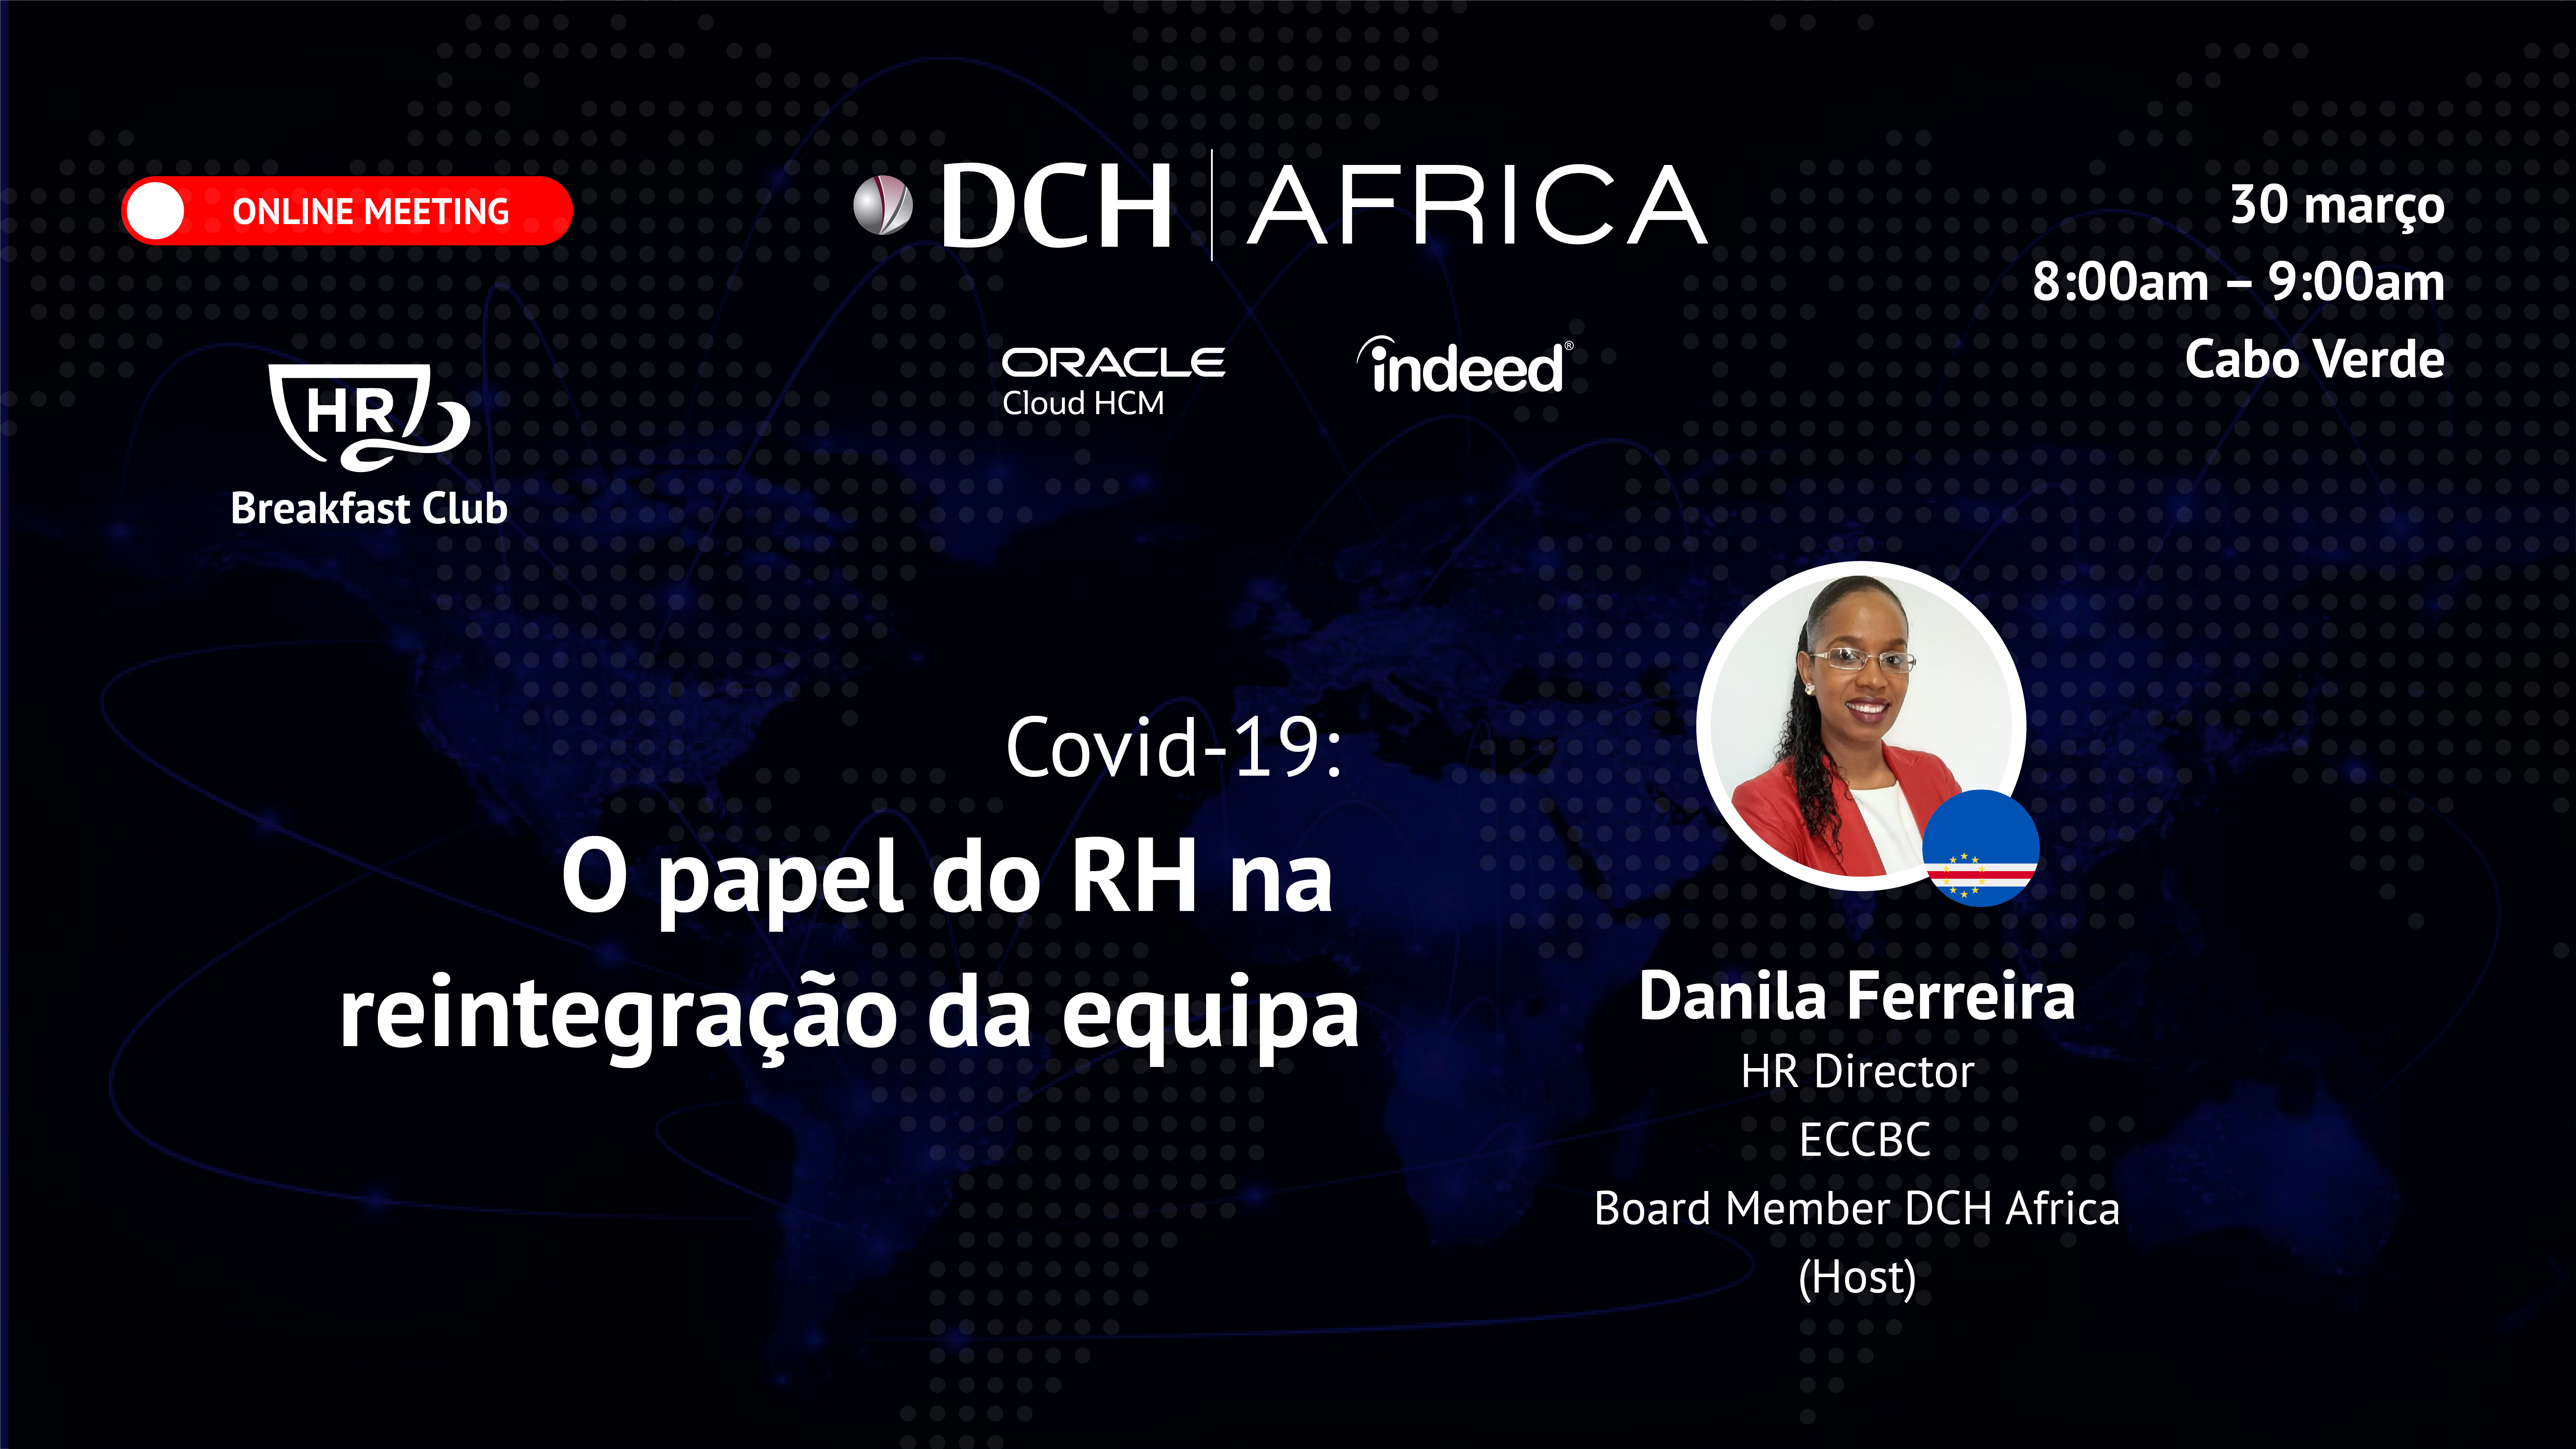 DCH AFRICA Cabo Verde